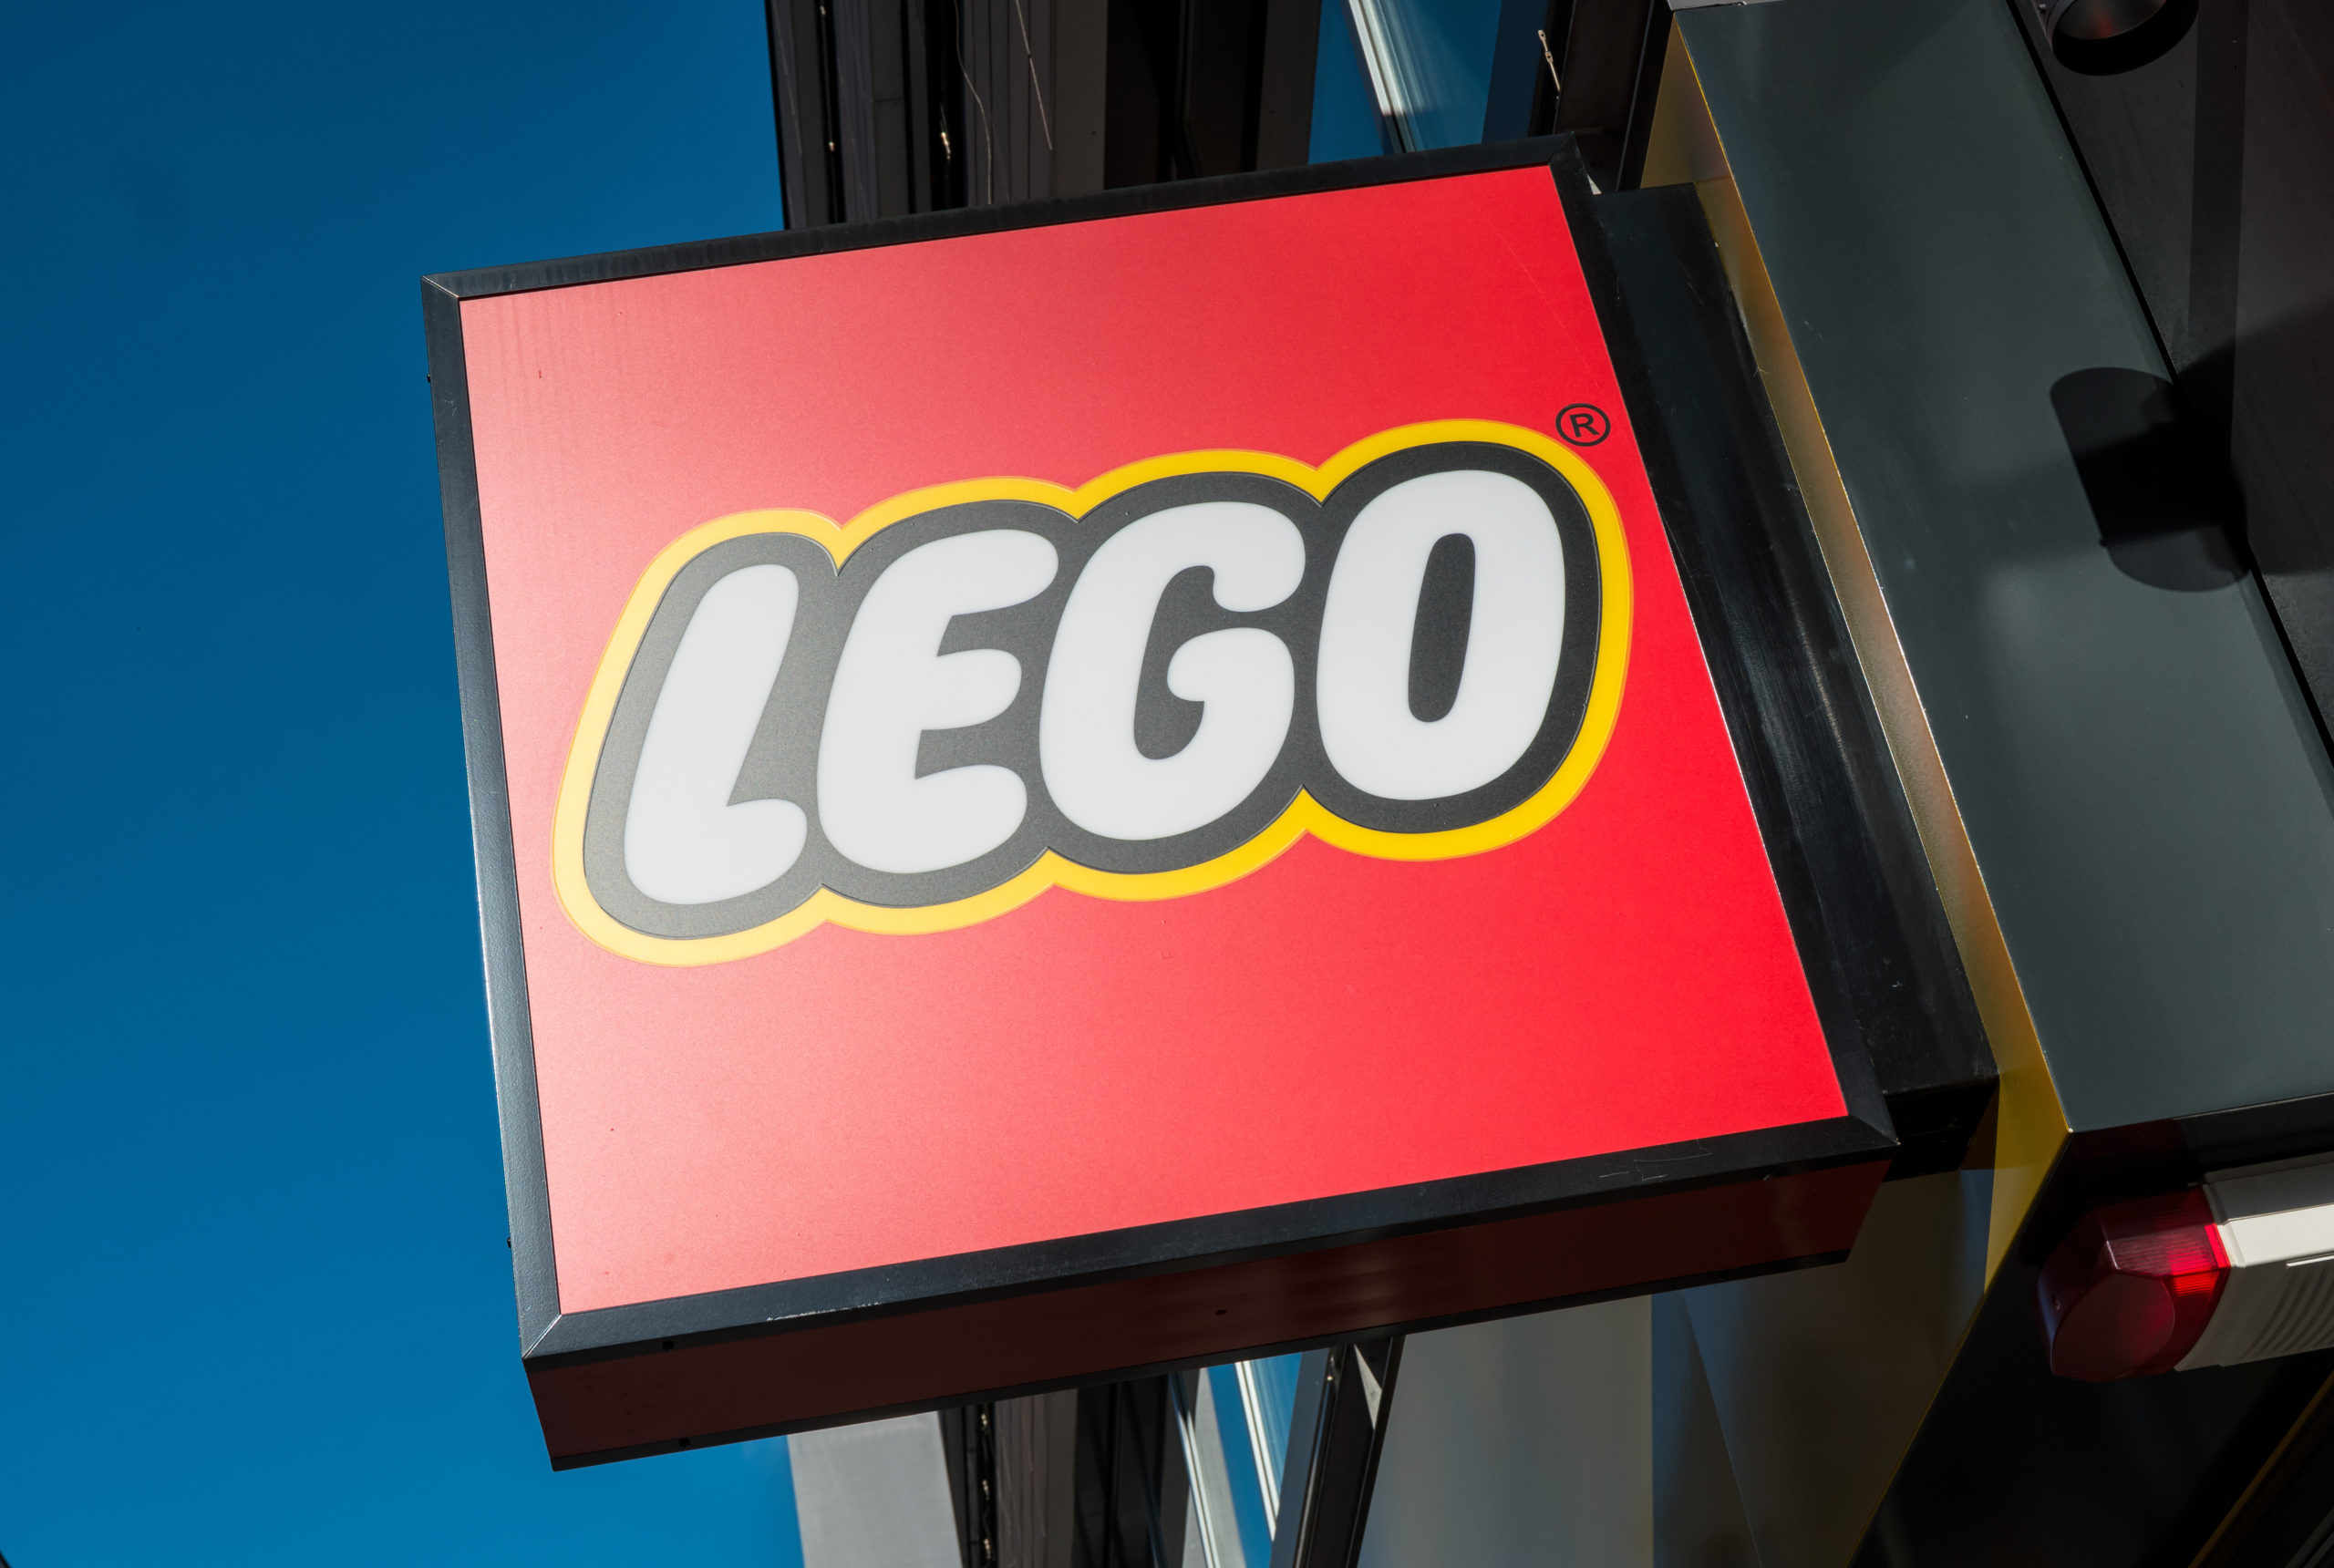 Produkt Understrege varsel Succeed in your marketing mix, and follow Lego's example!